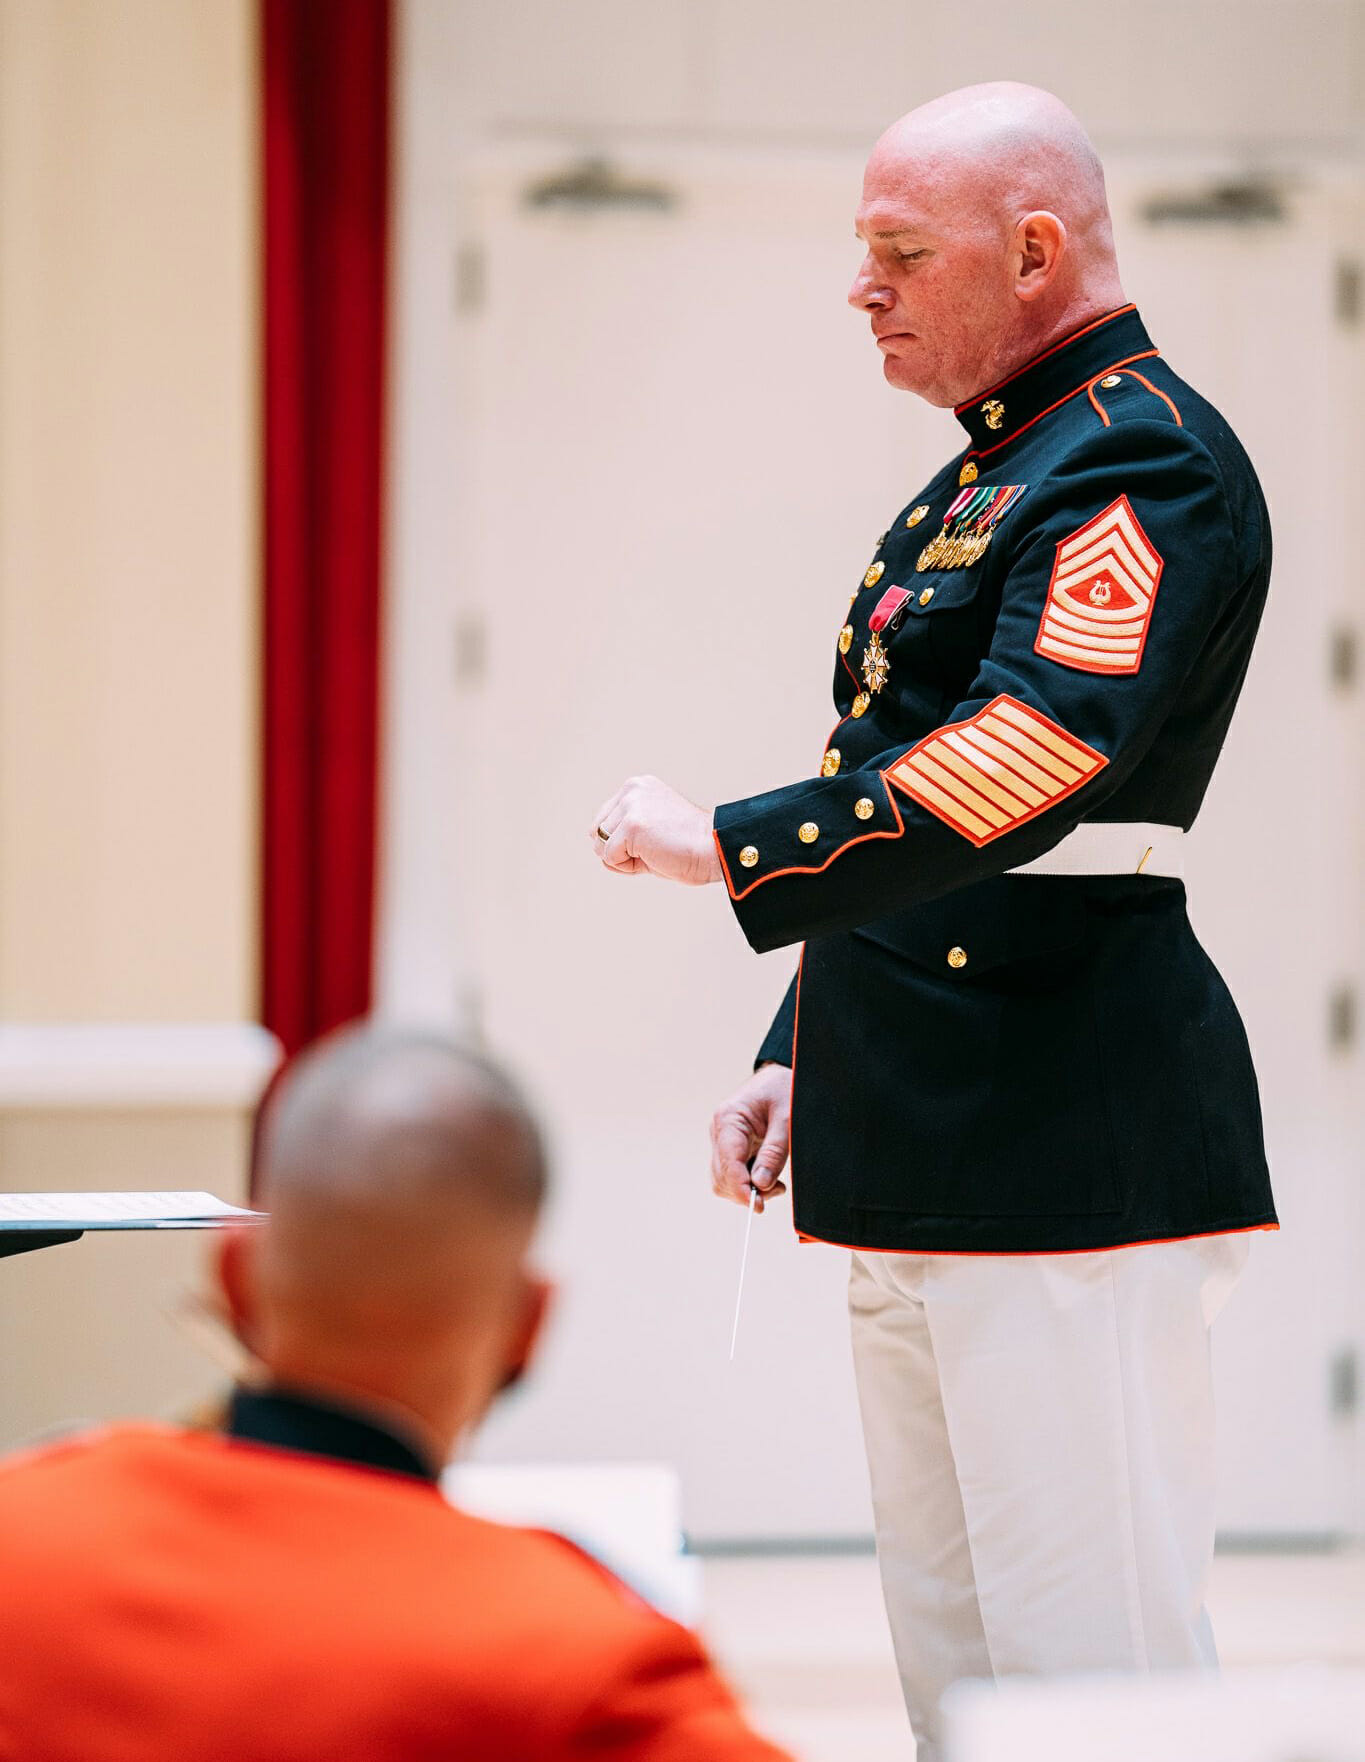 Peter Wilson conducts the U.S. Marine Corps Orchestra